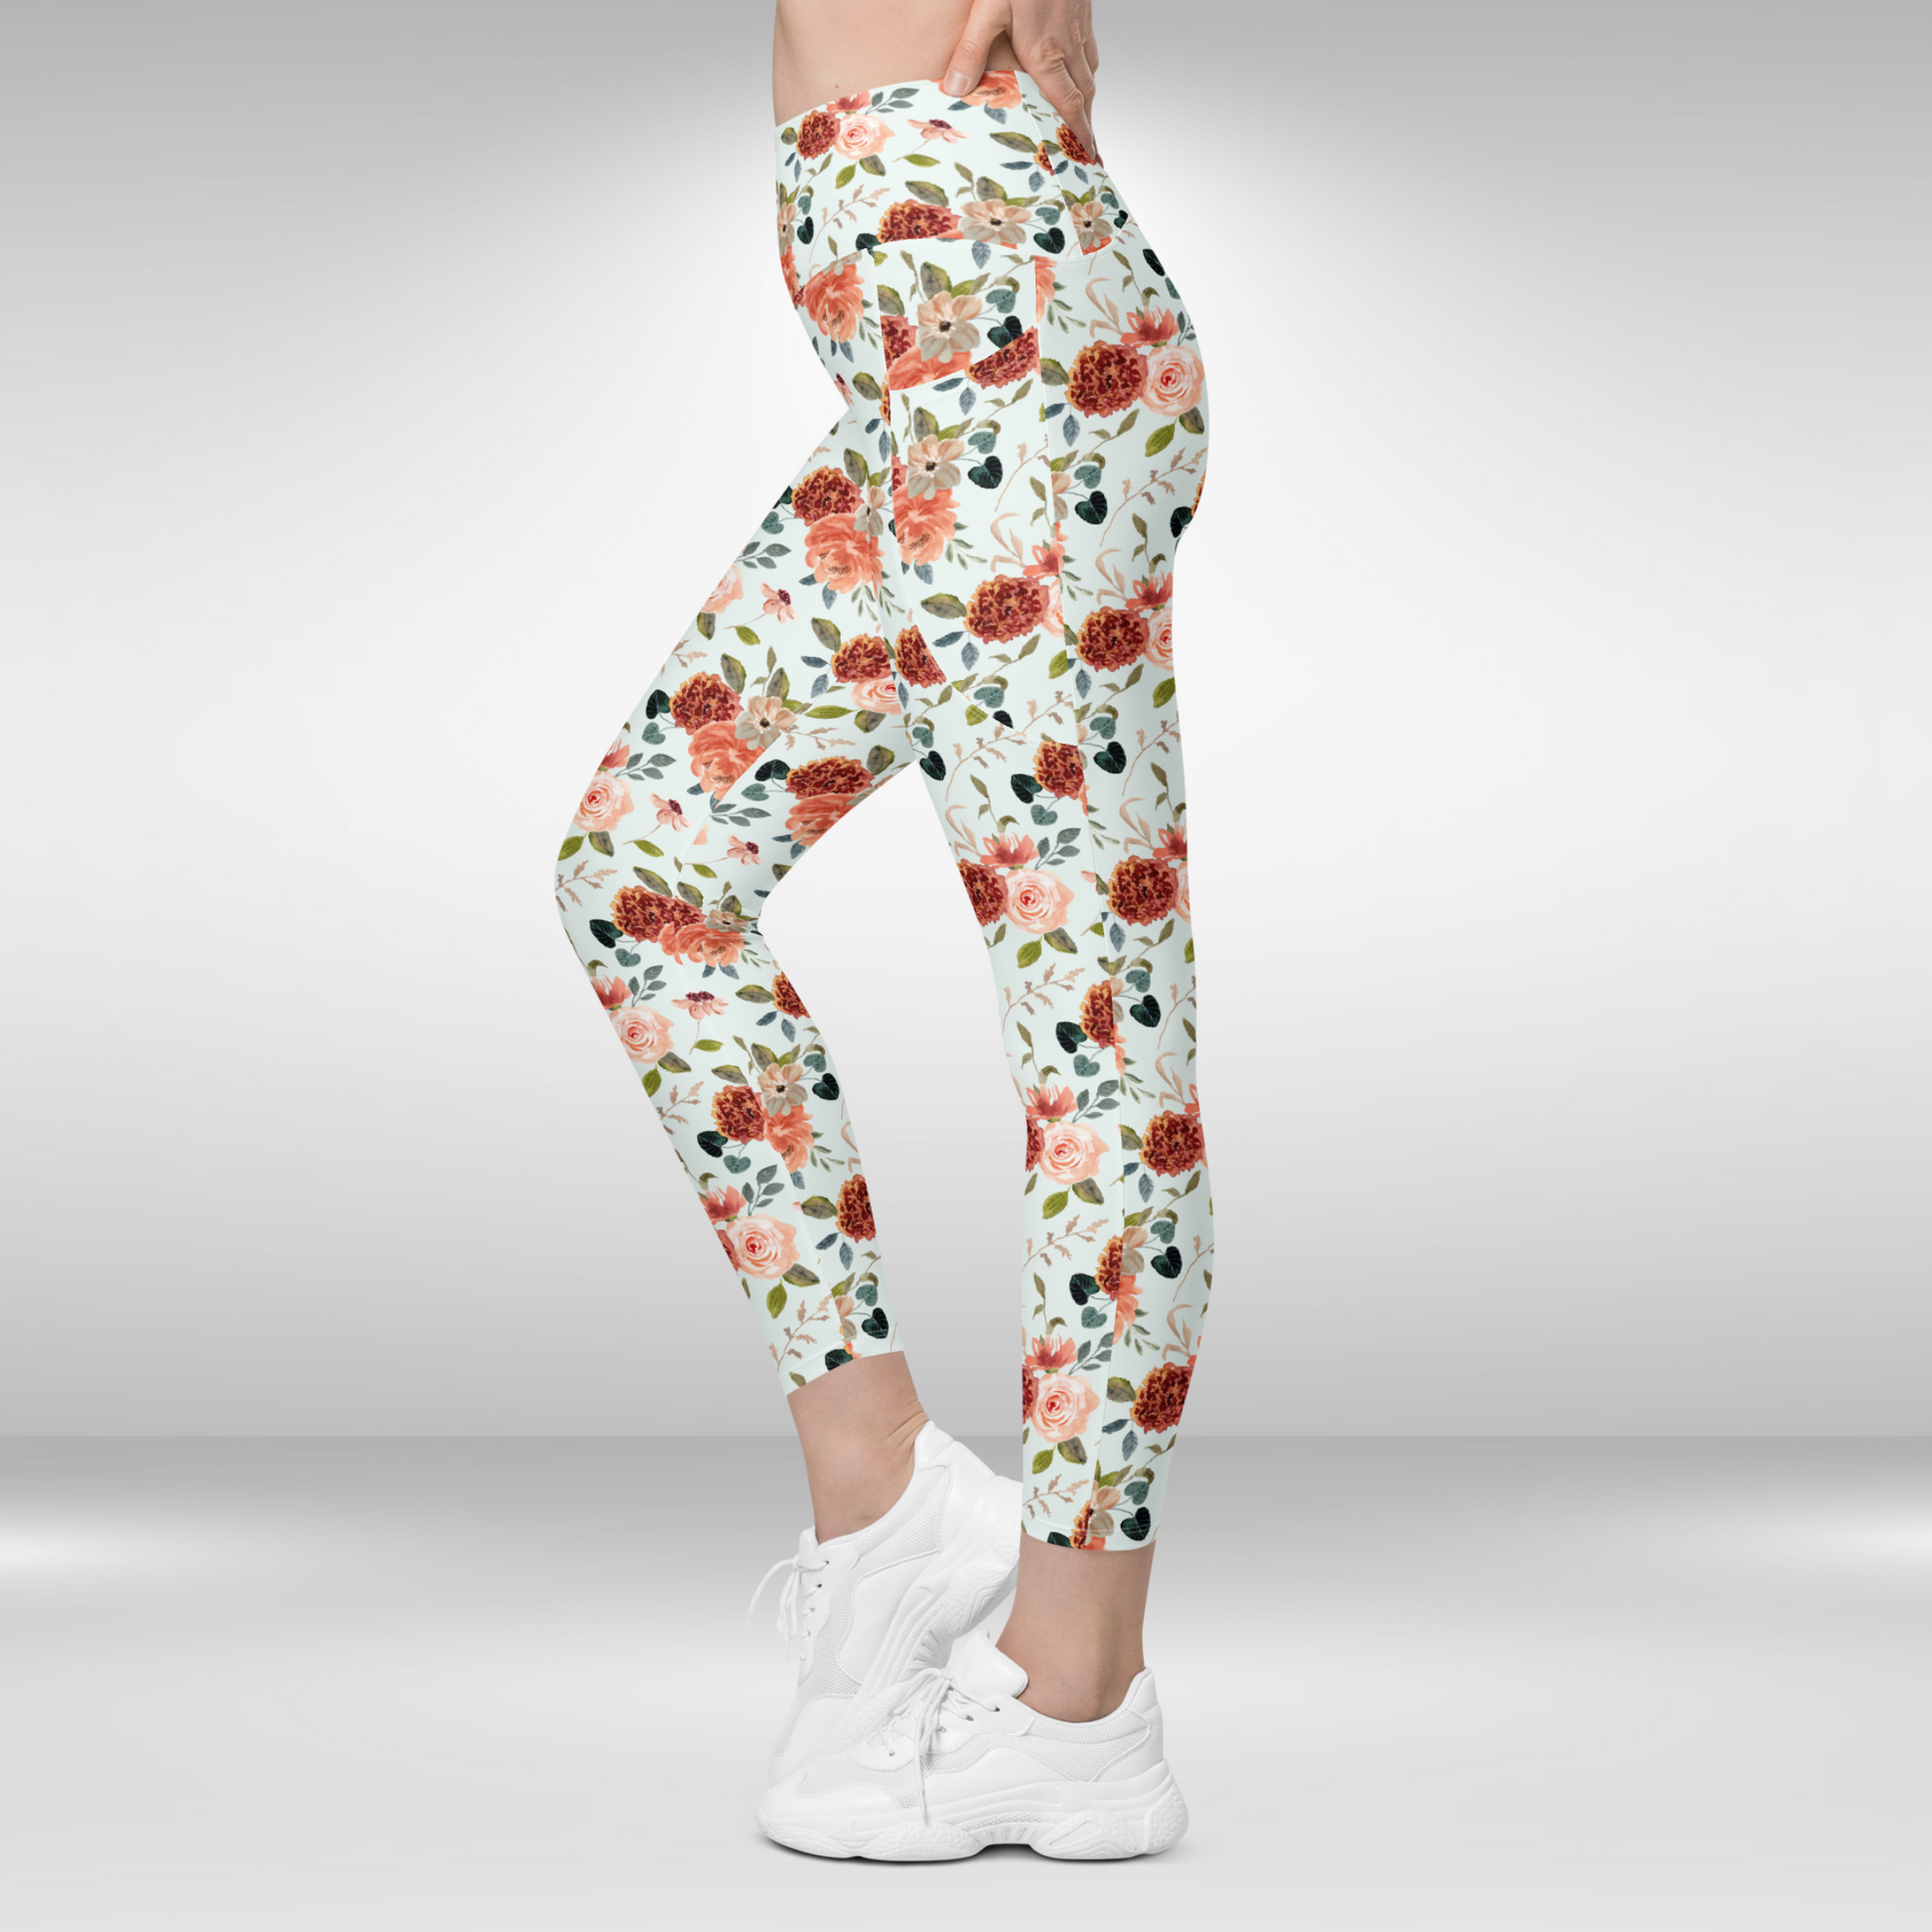 Women Gym Legging With Pockets - Floral Print